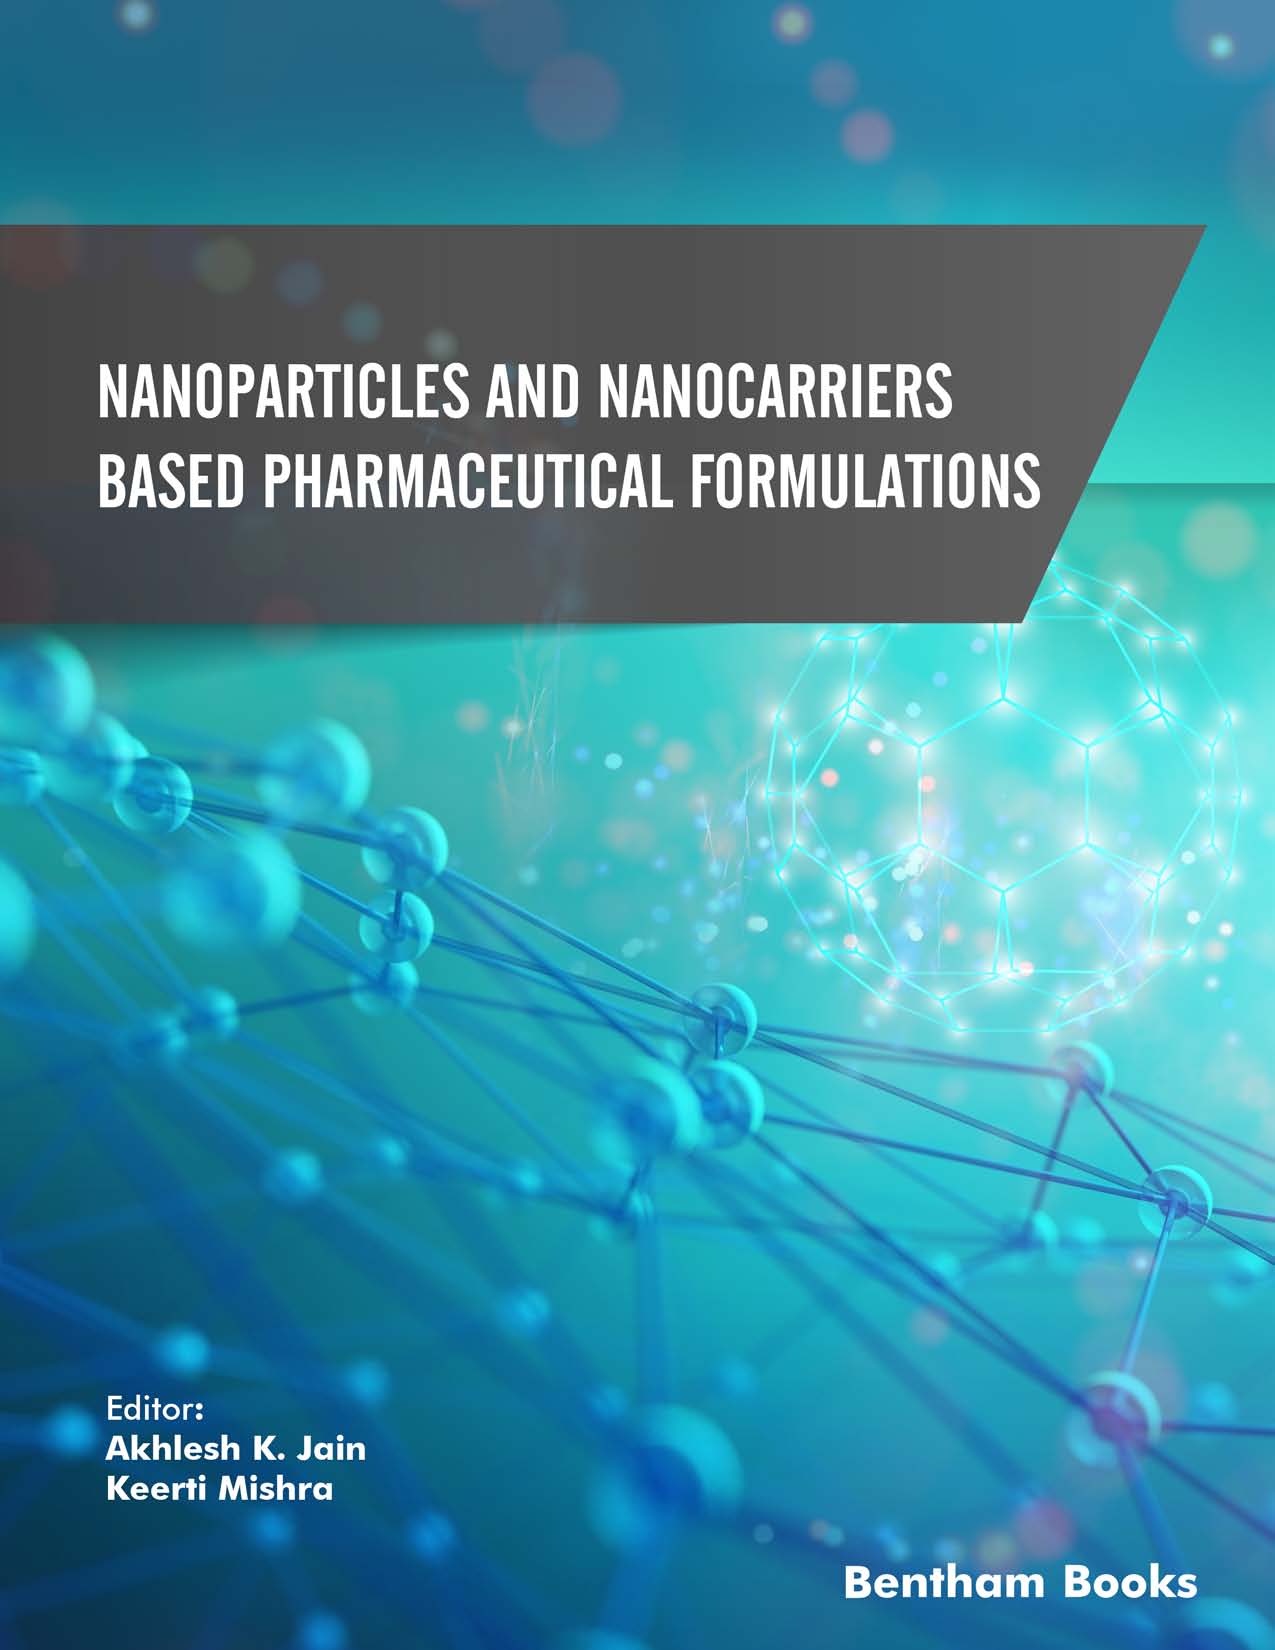 Nanoparticles and Nanocarriers- Based Pharmaceutical Formulations